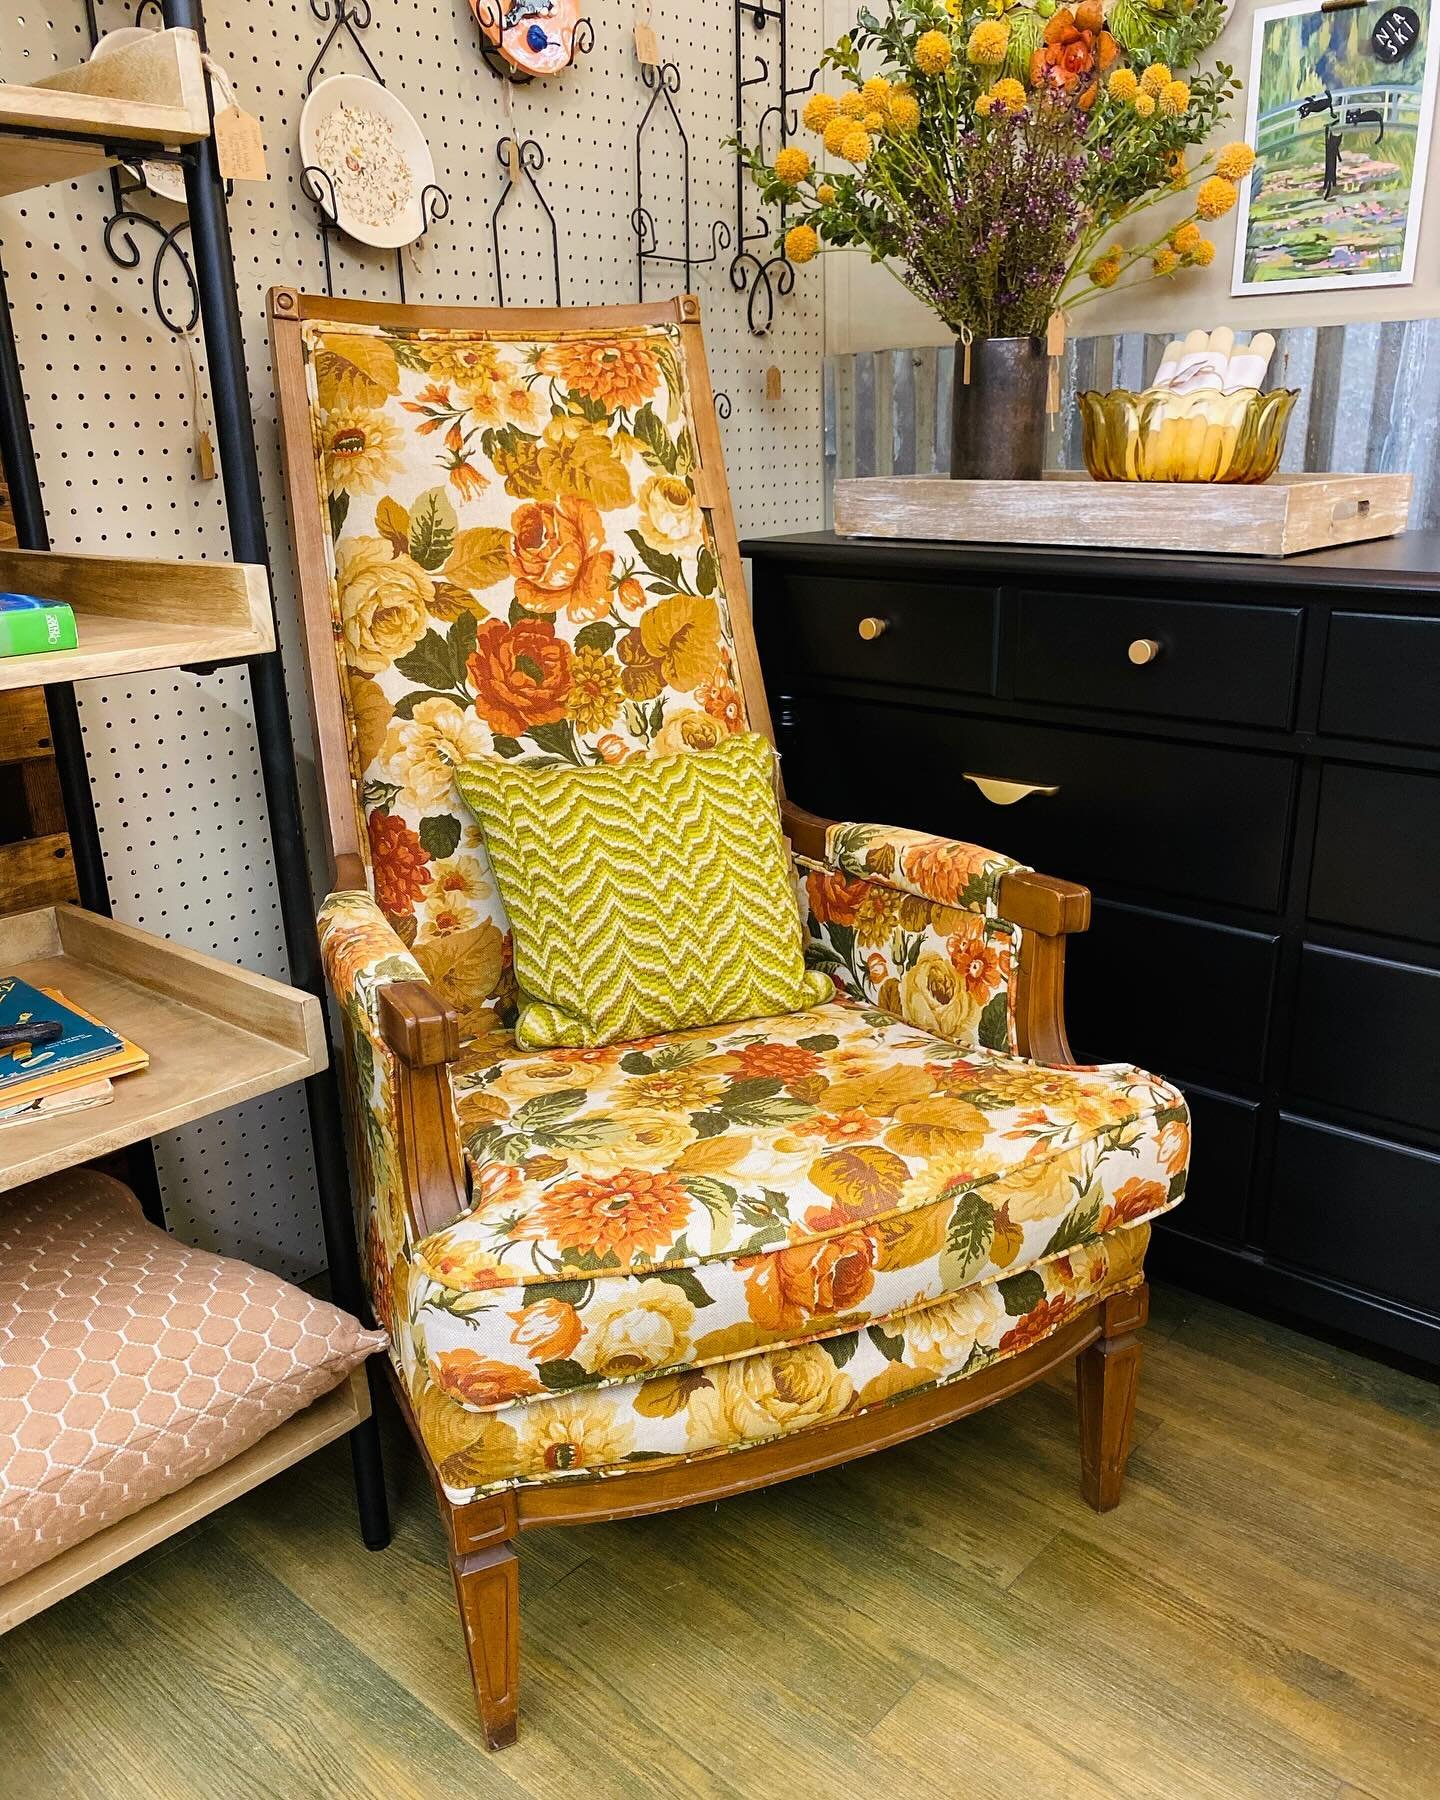 🤪 A little chair humor for you this Friday&hellip;. What is a chair&rsquo;s least favorite song???
👇🏼

&ldquo;Stand By Me.&rdquo; 😆

Marietta is here to close out our week strong with some gorgeous chairs that will steal your heart!

Dealer codes